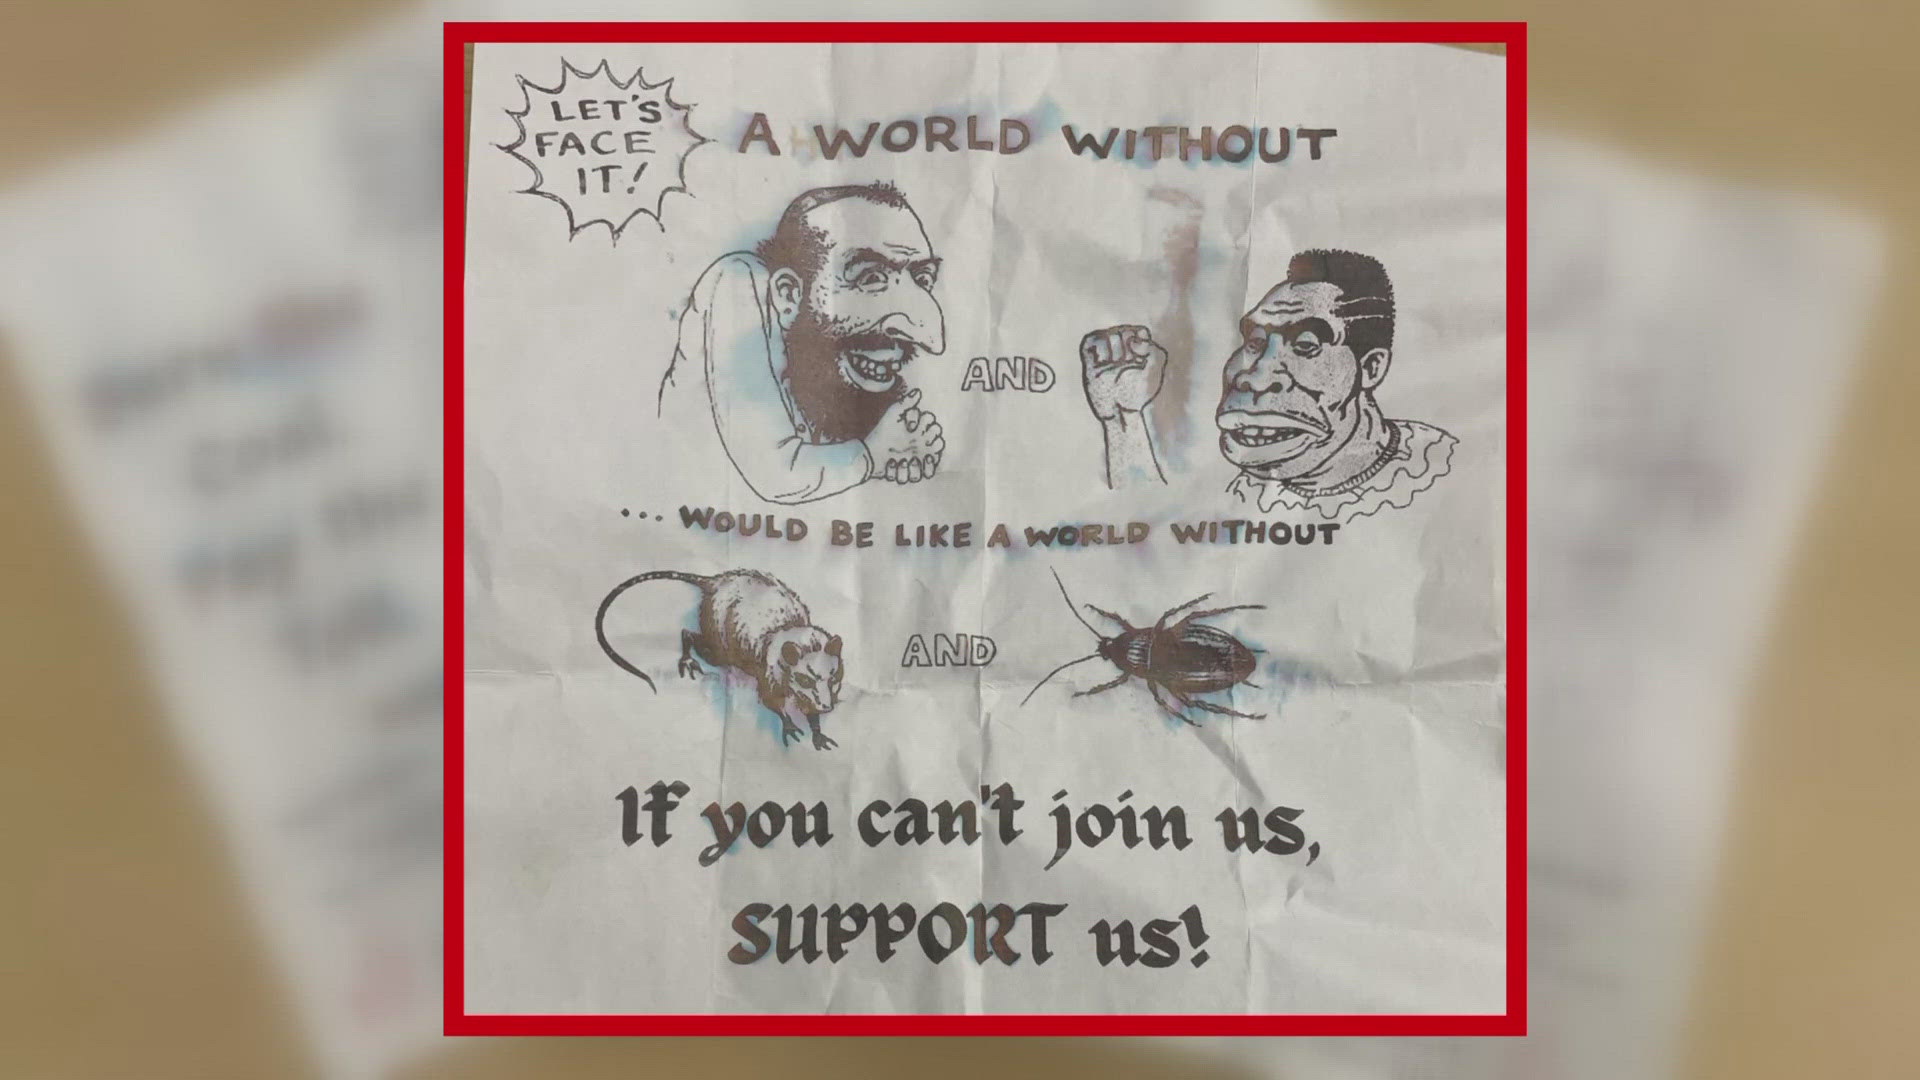 According to officials, the flyer featured racist caricatures of Black people, called for whites to take up arms, and provided contact info to a Kentucky KKK group.